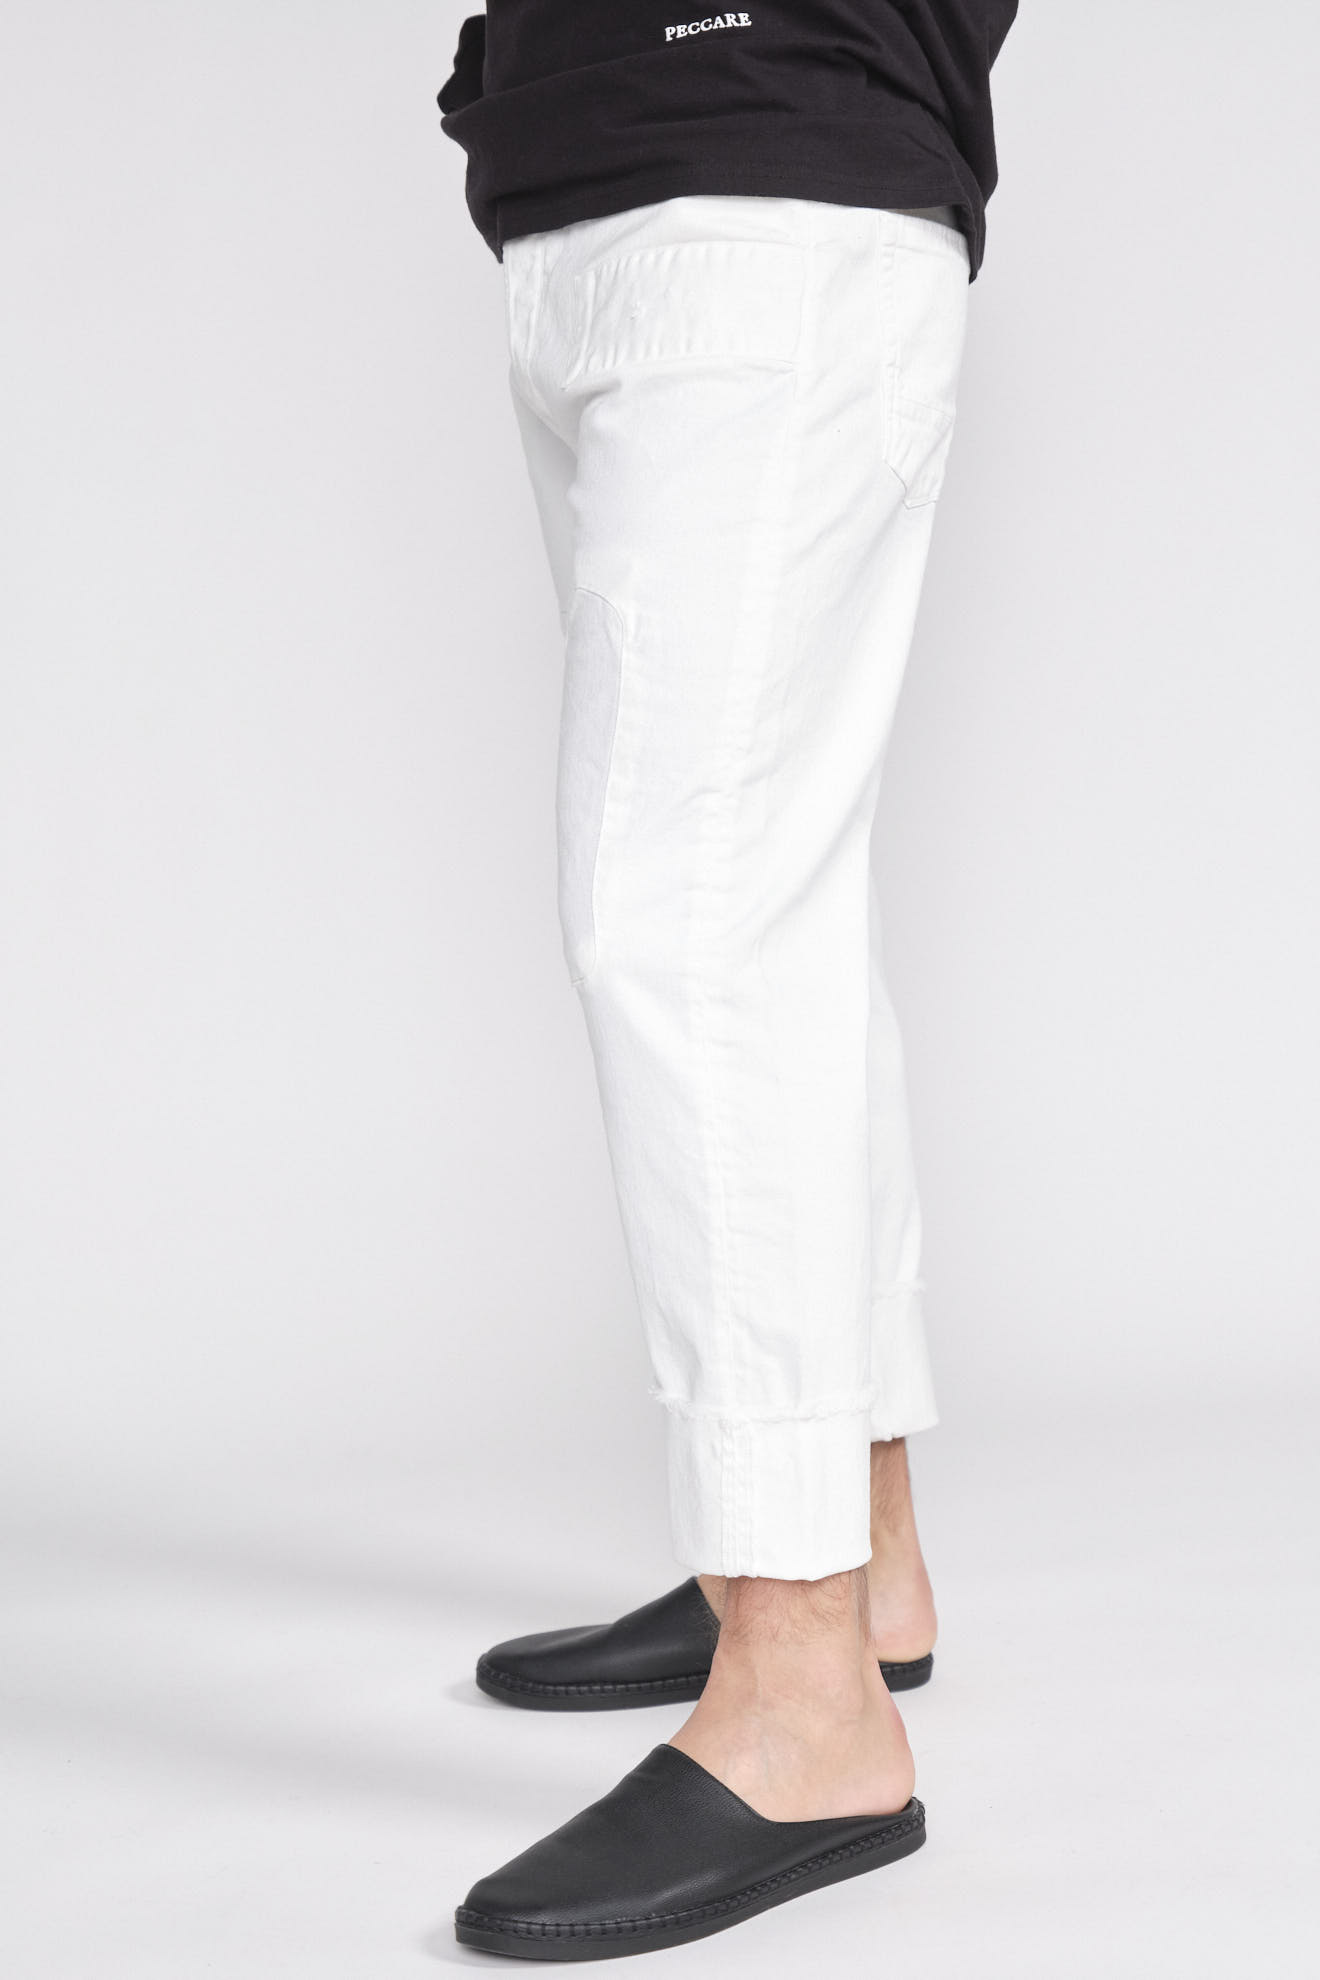 maurizio massimino Jose - denim jeans with patch patches white 48